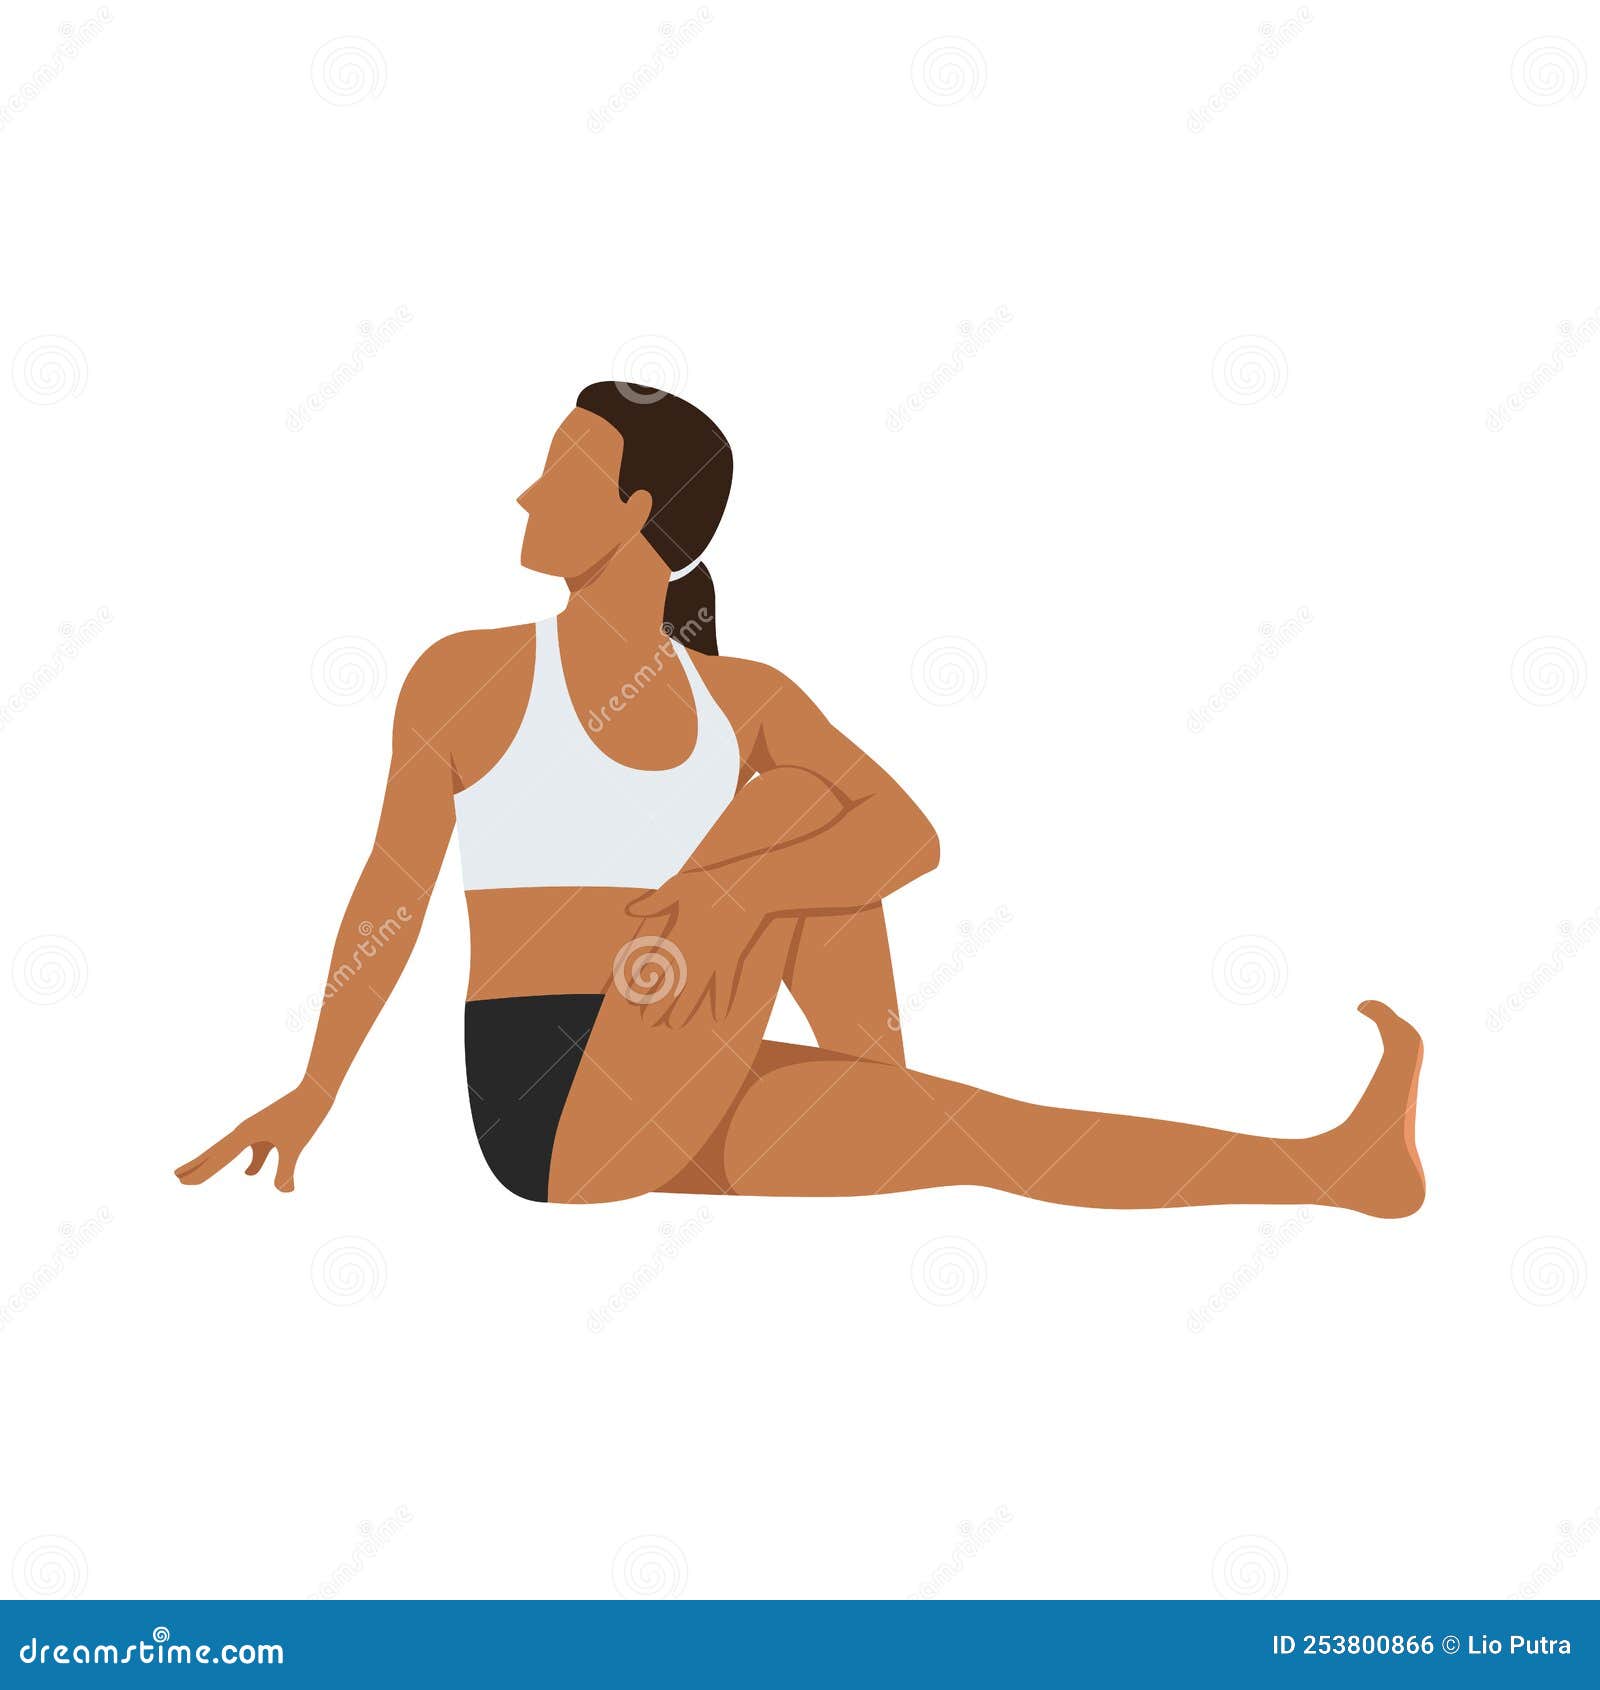 Constipation During Pregnancy? These Yoga Poses Can Help - L'Aquila Active